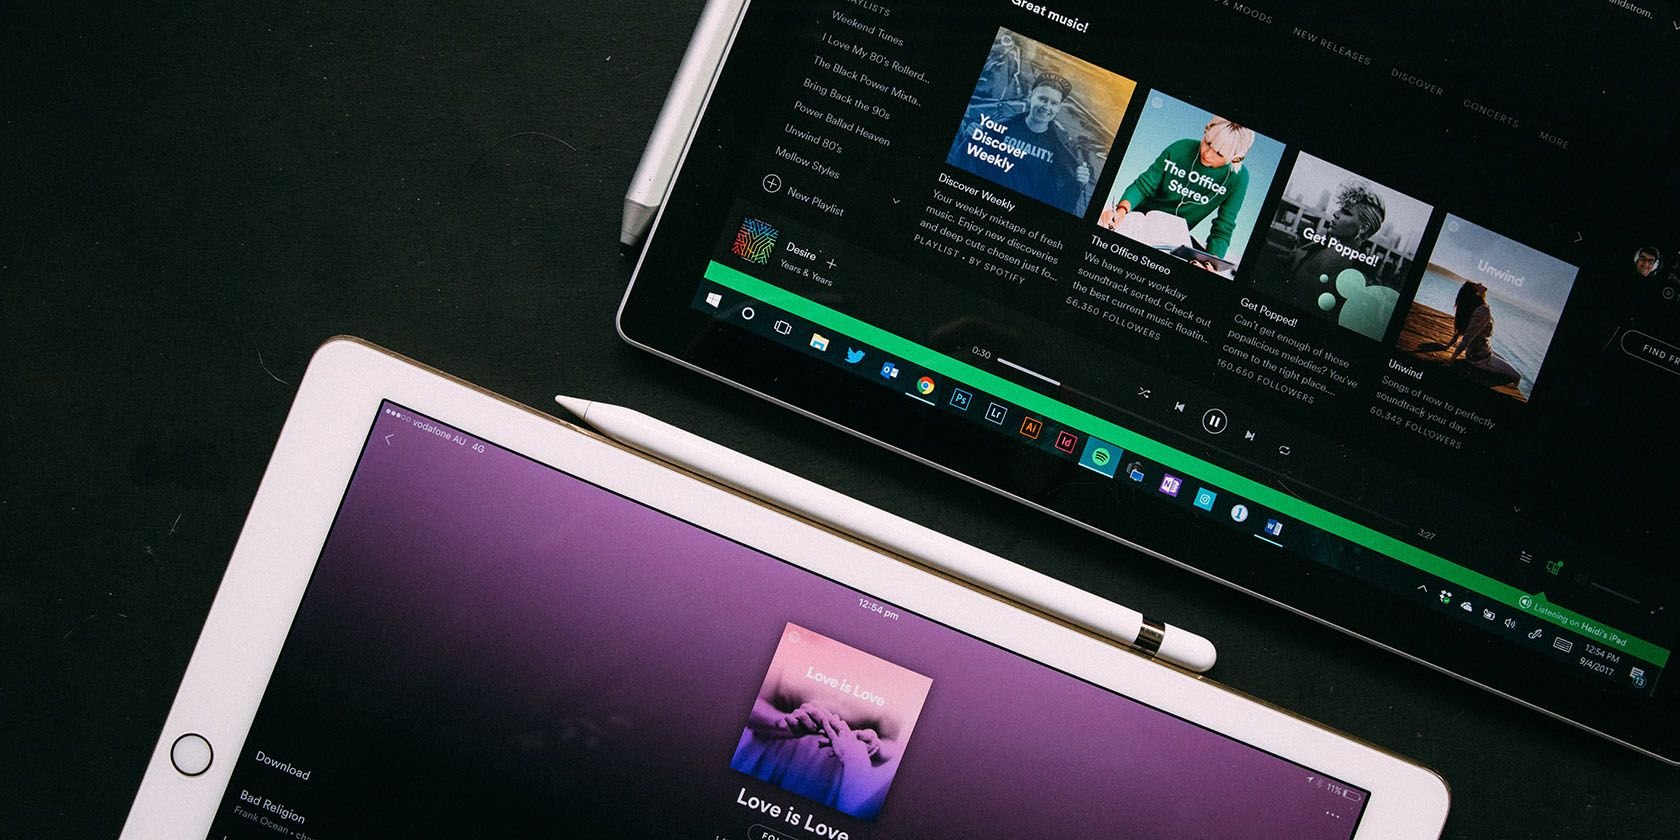 How to Silence Spotify Ads Without Harming Artists